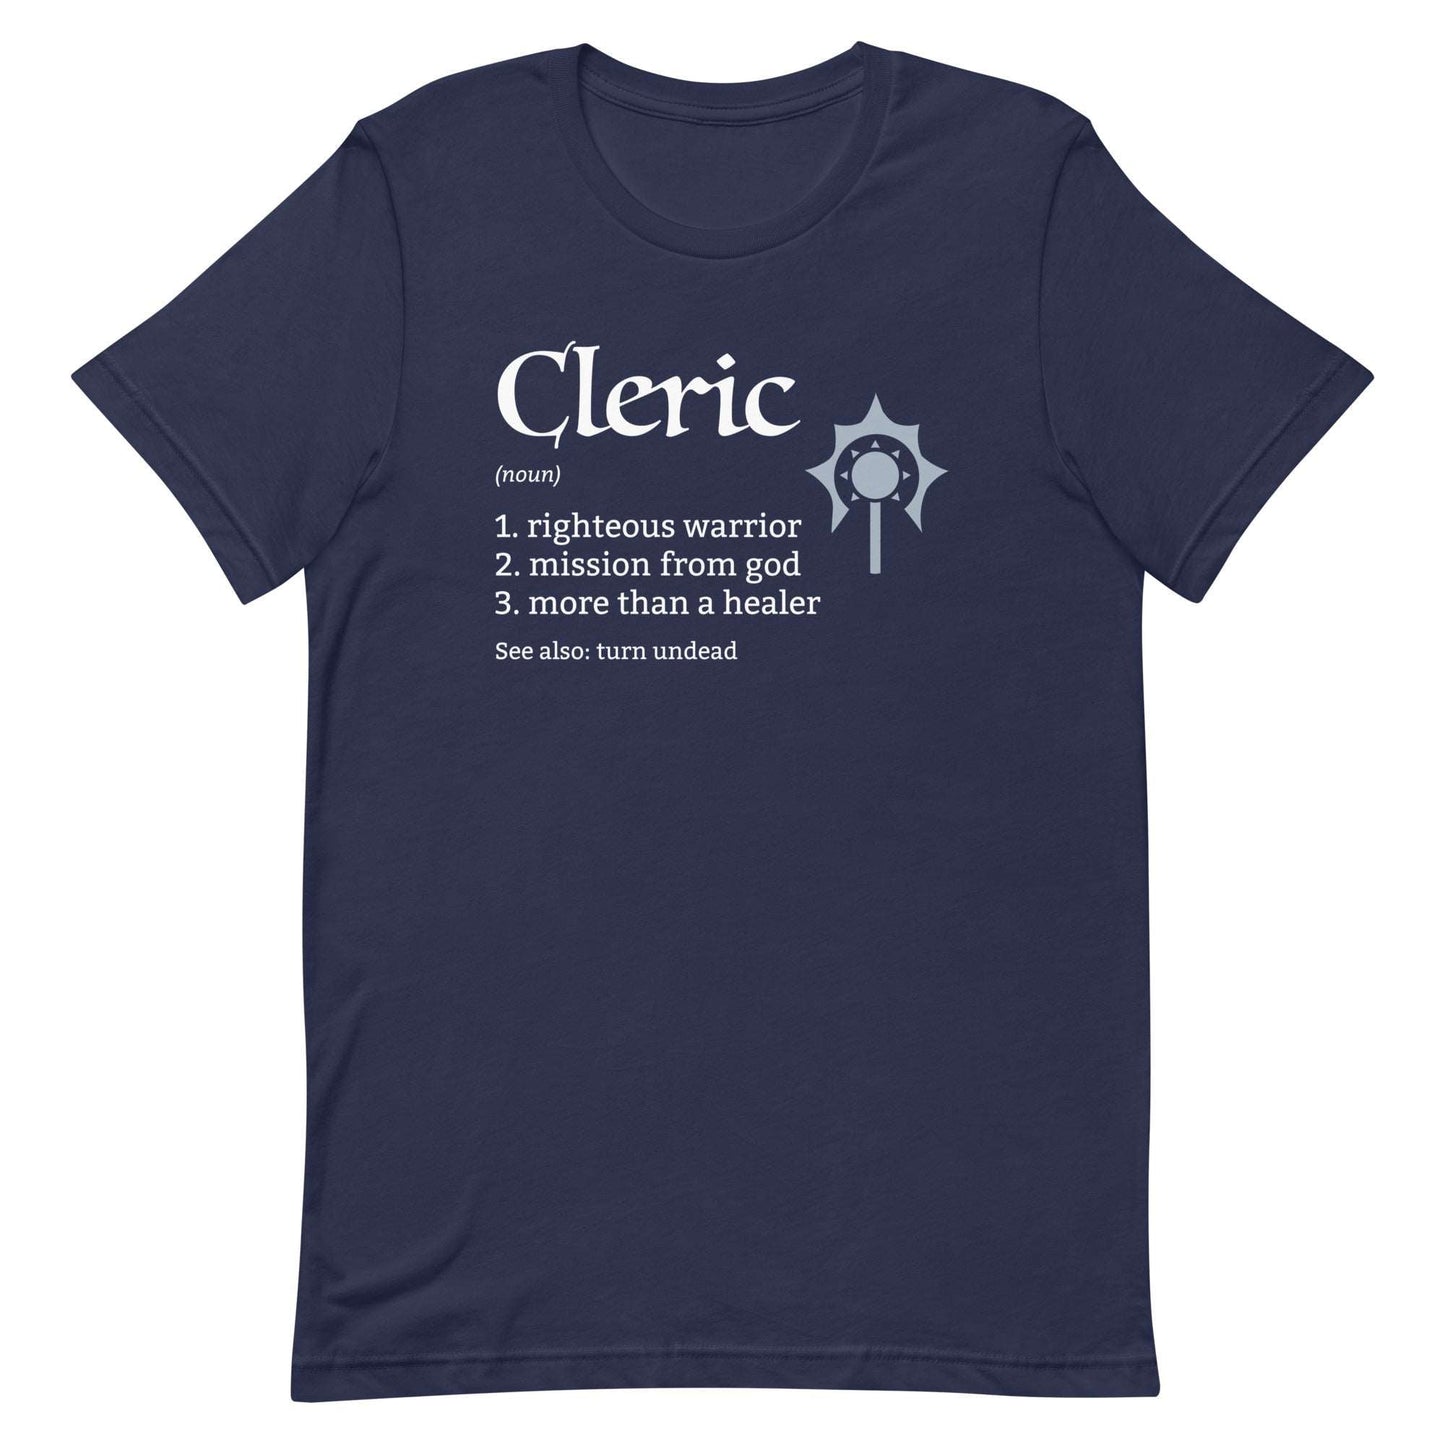 Cleric Class Definition T-Shirt – Funny DnD Definition Tee T-Shirt Navy / S